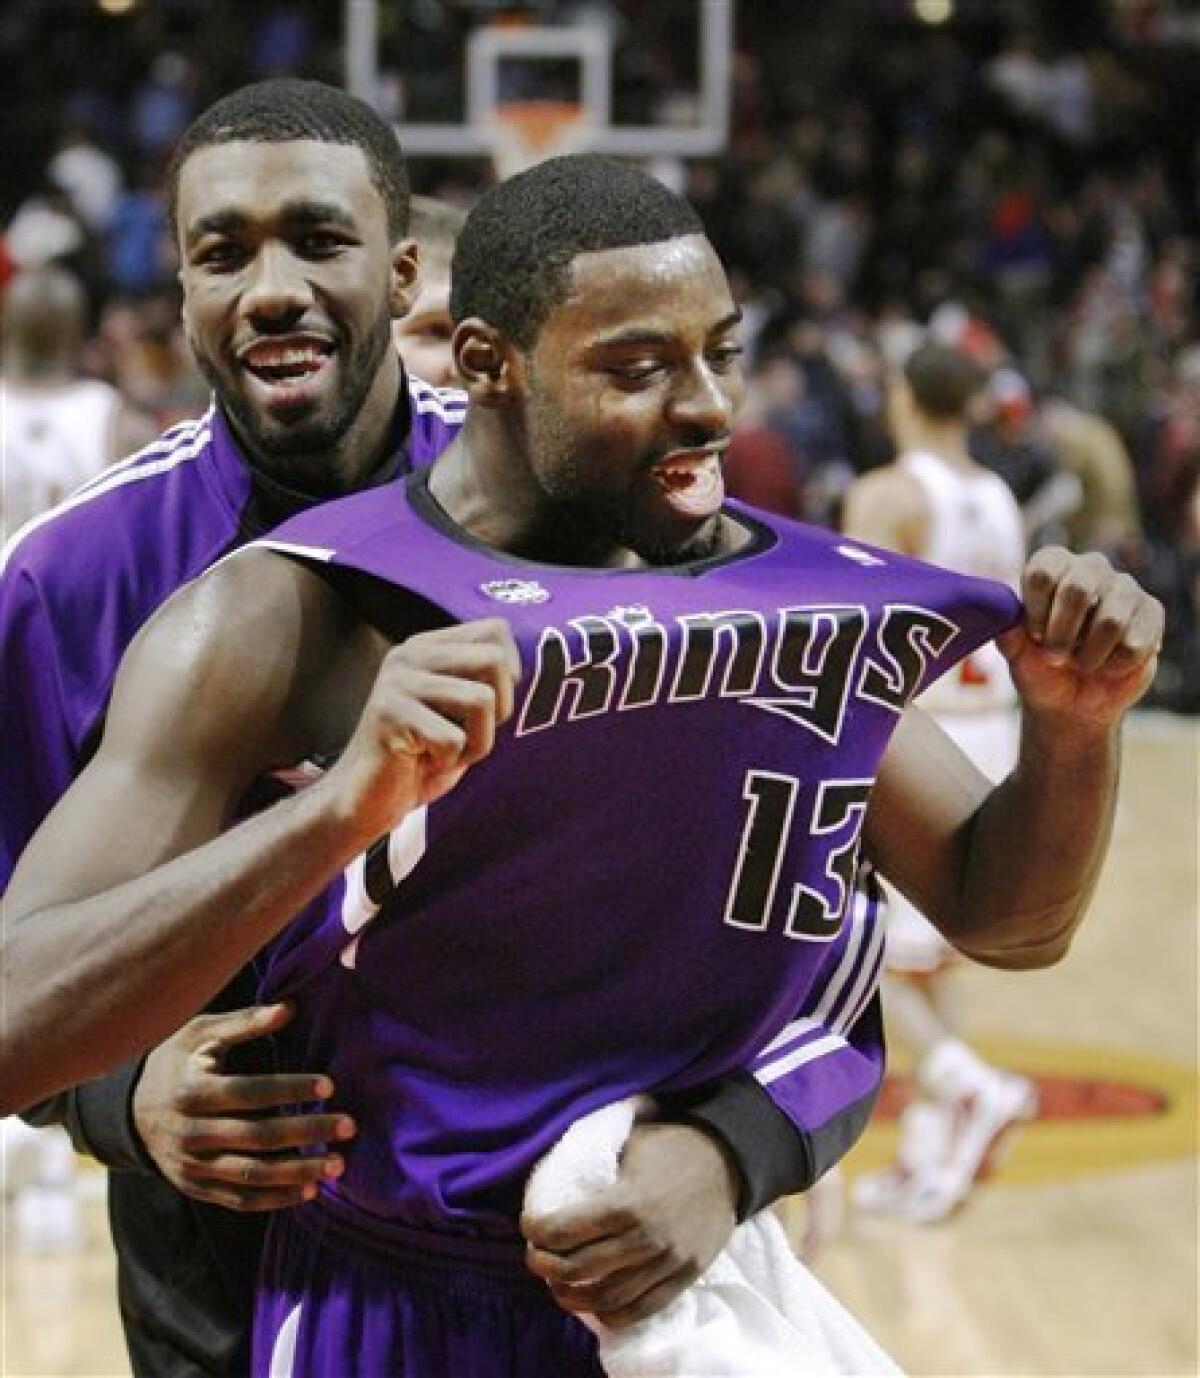 Tyreke Evans appears to be attempting a comeback - The Kings Herald